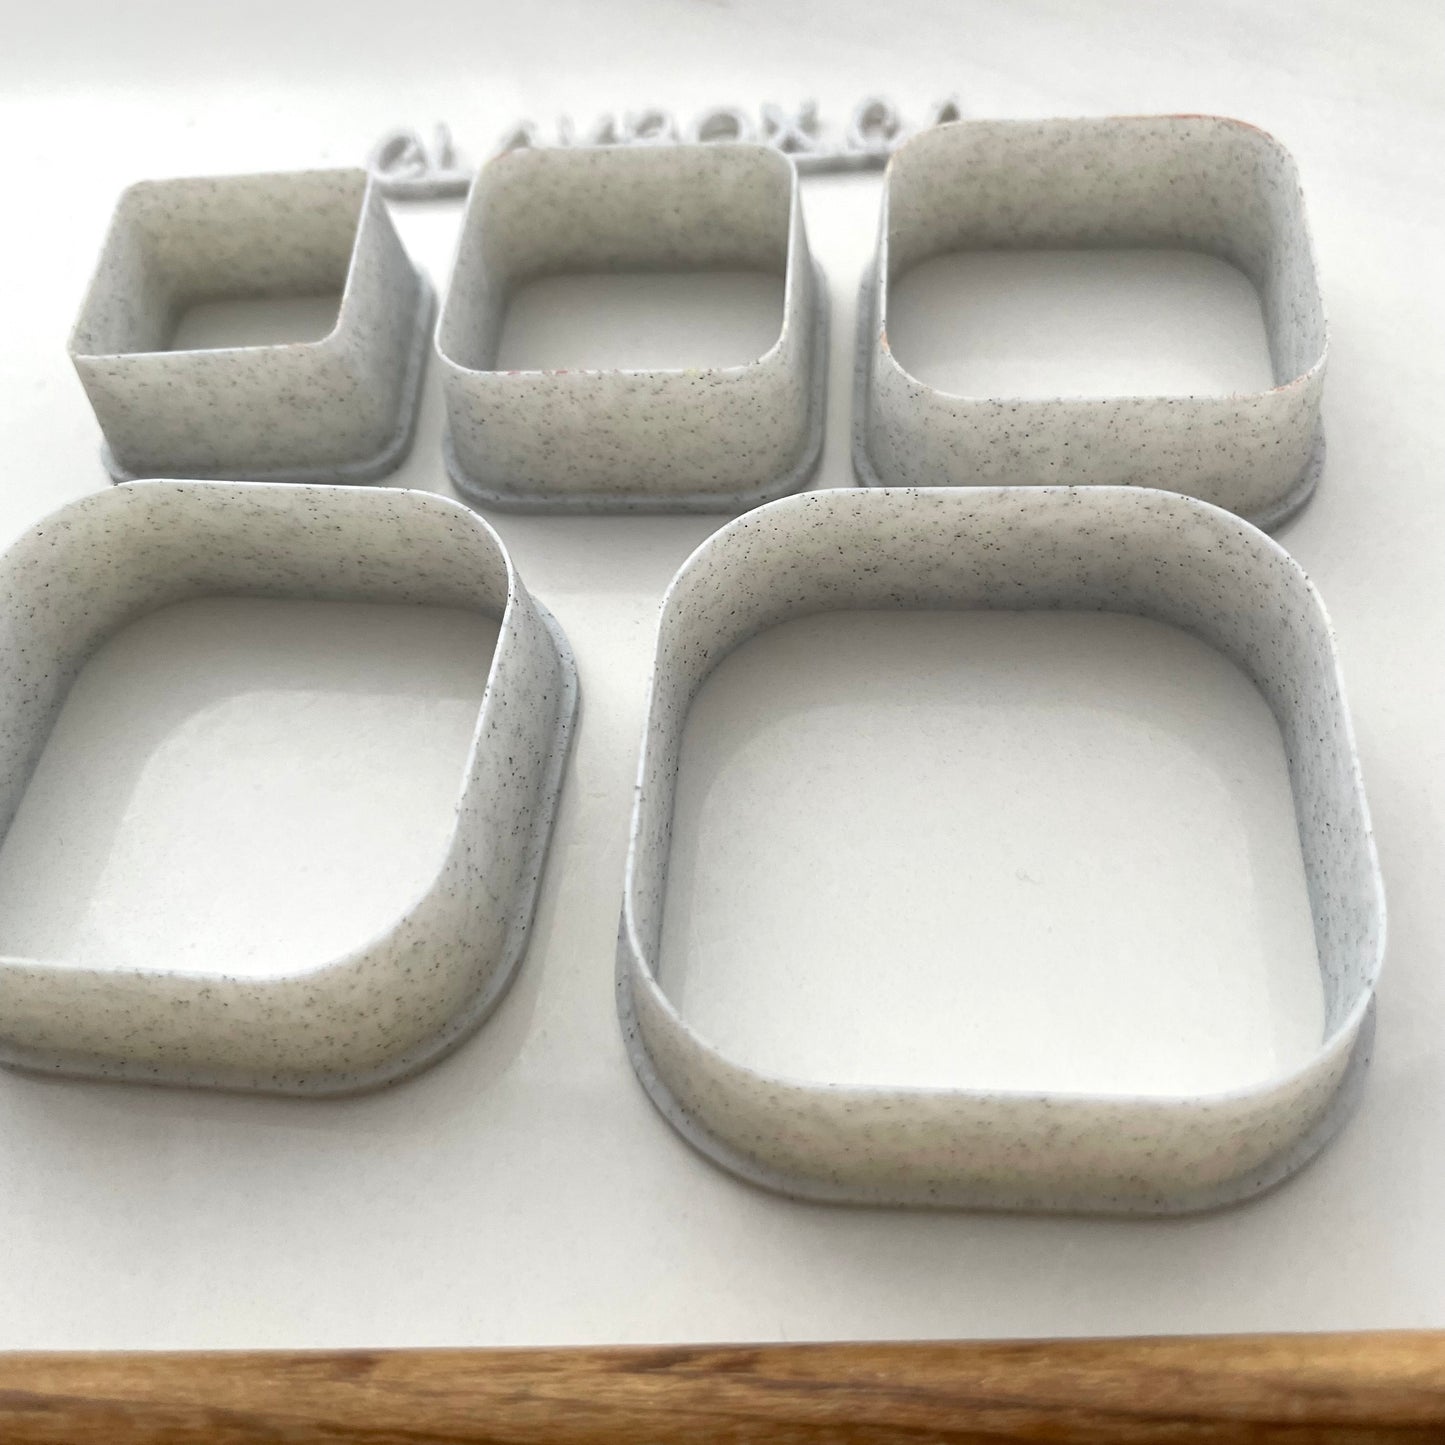 Square bezel cutter set - made for polymer clay